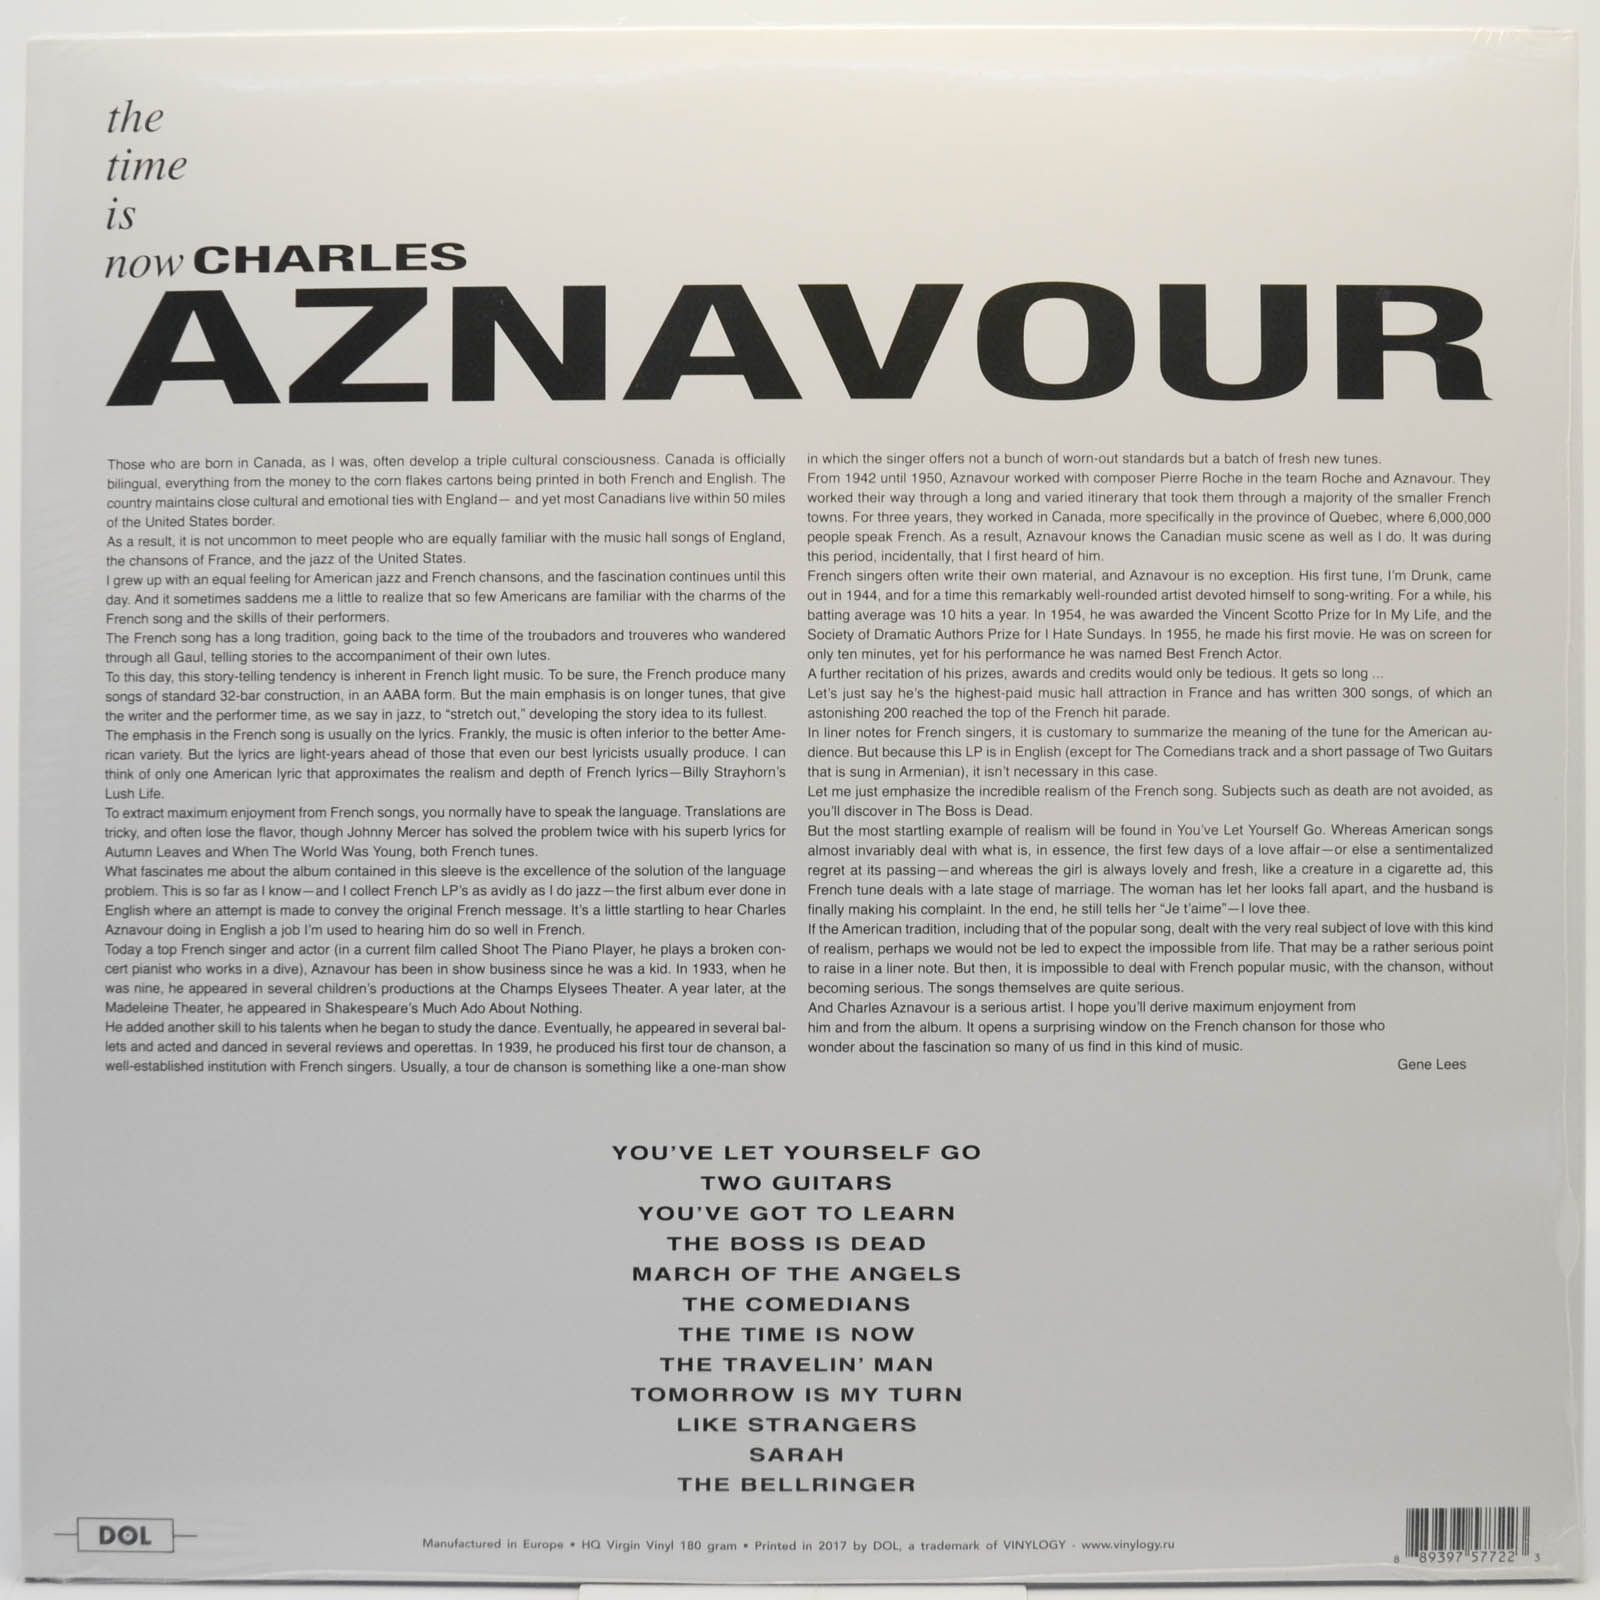 Charles Aznavour — The Time Is Now, 1962